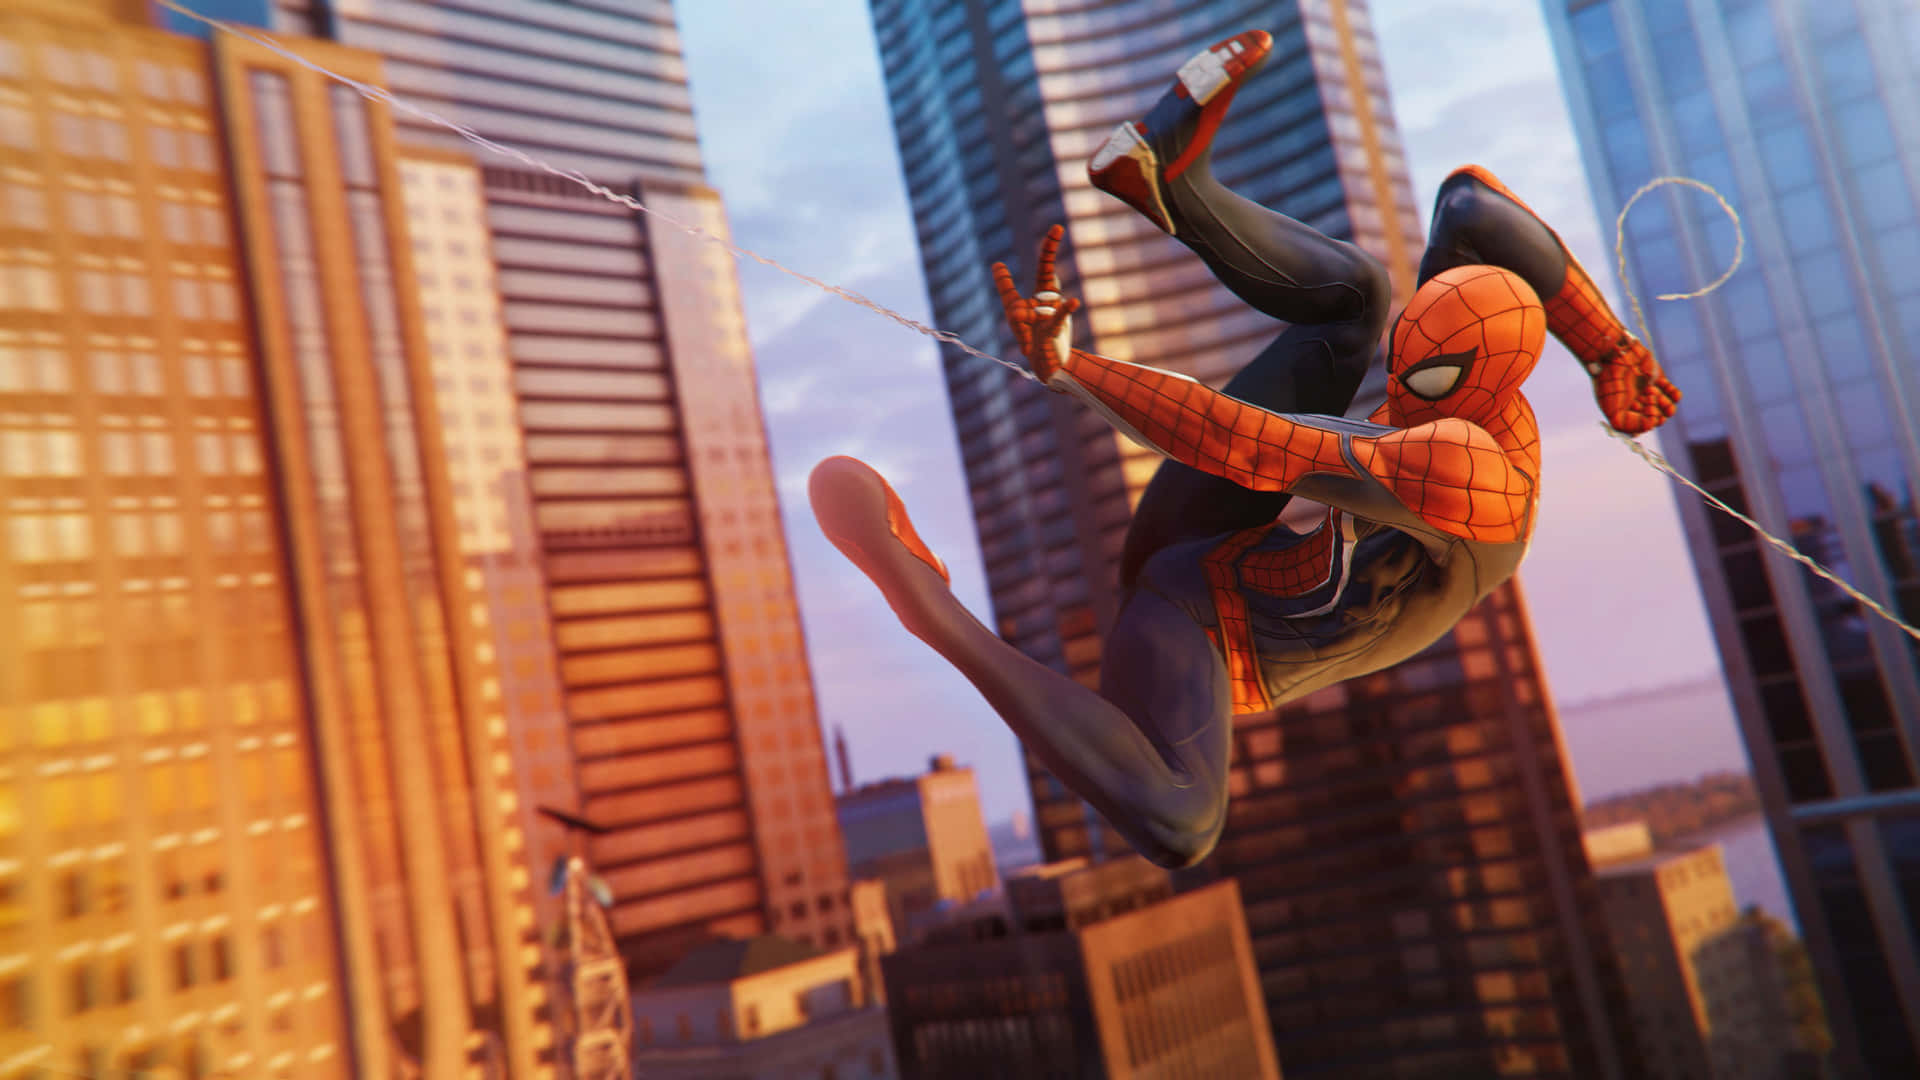 Spectacular Spider-Man Web Slinging Across the City Wallpaper